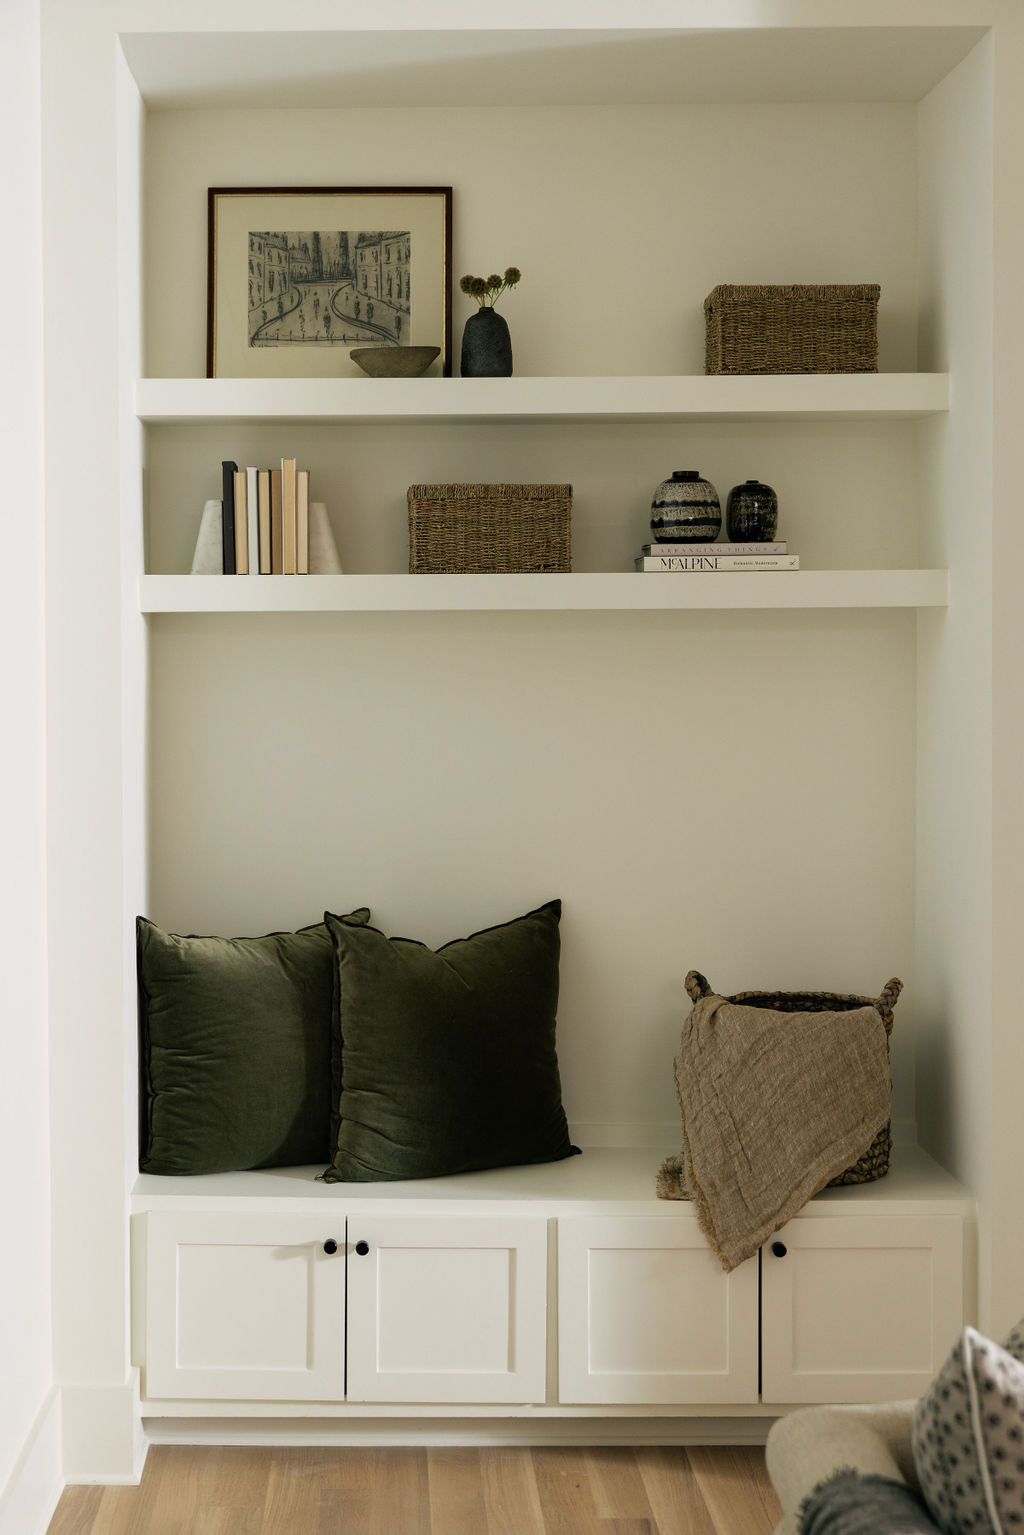 10 Simple Ways to Refresh Your Home in the New Year - Add Thoughtful Storage